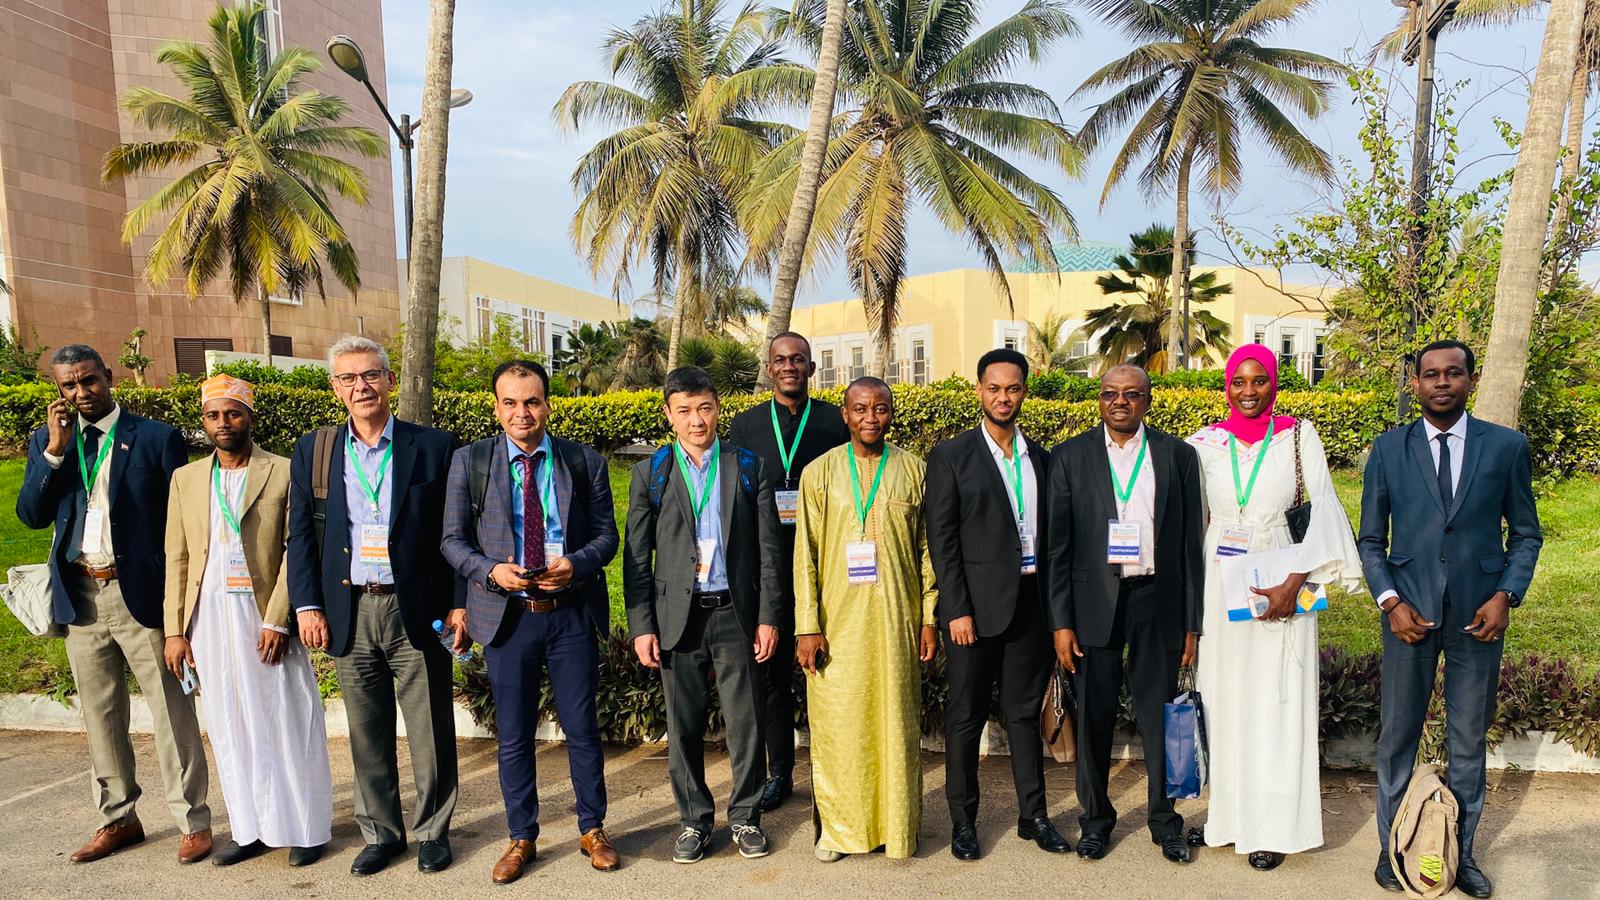 The 17 OIC Trade Fair to be held in Dakar, Republic of Senegal on 13-19 June 2022 Main Photo